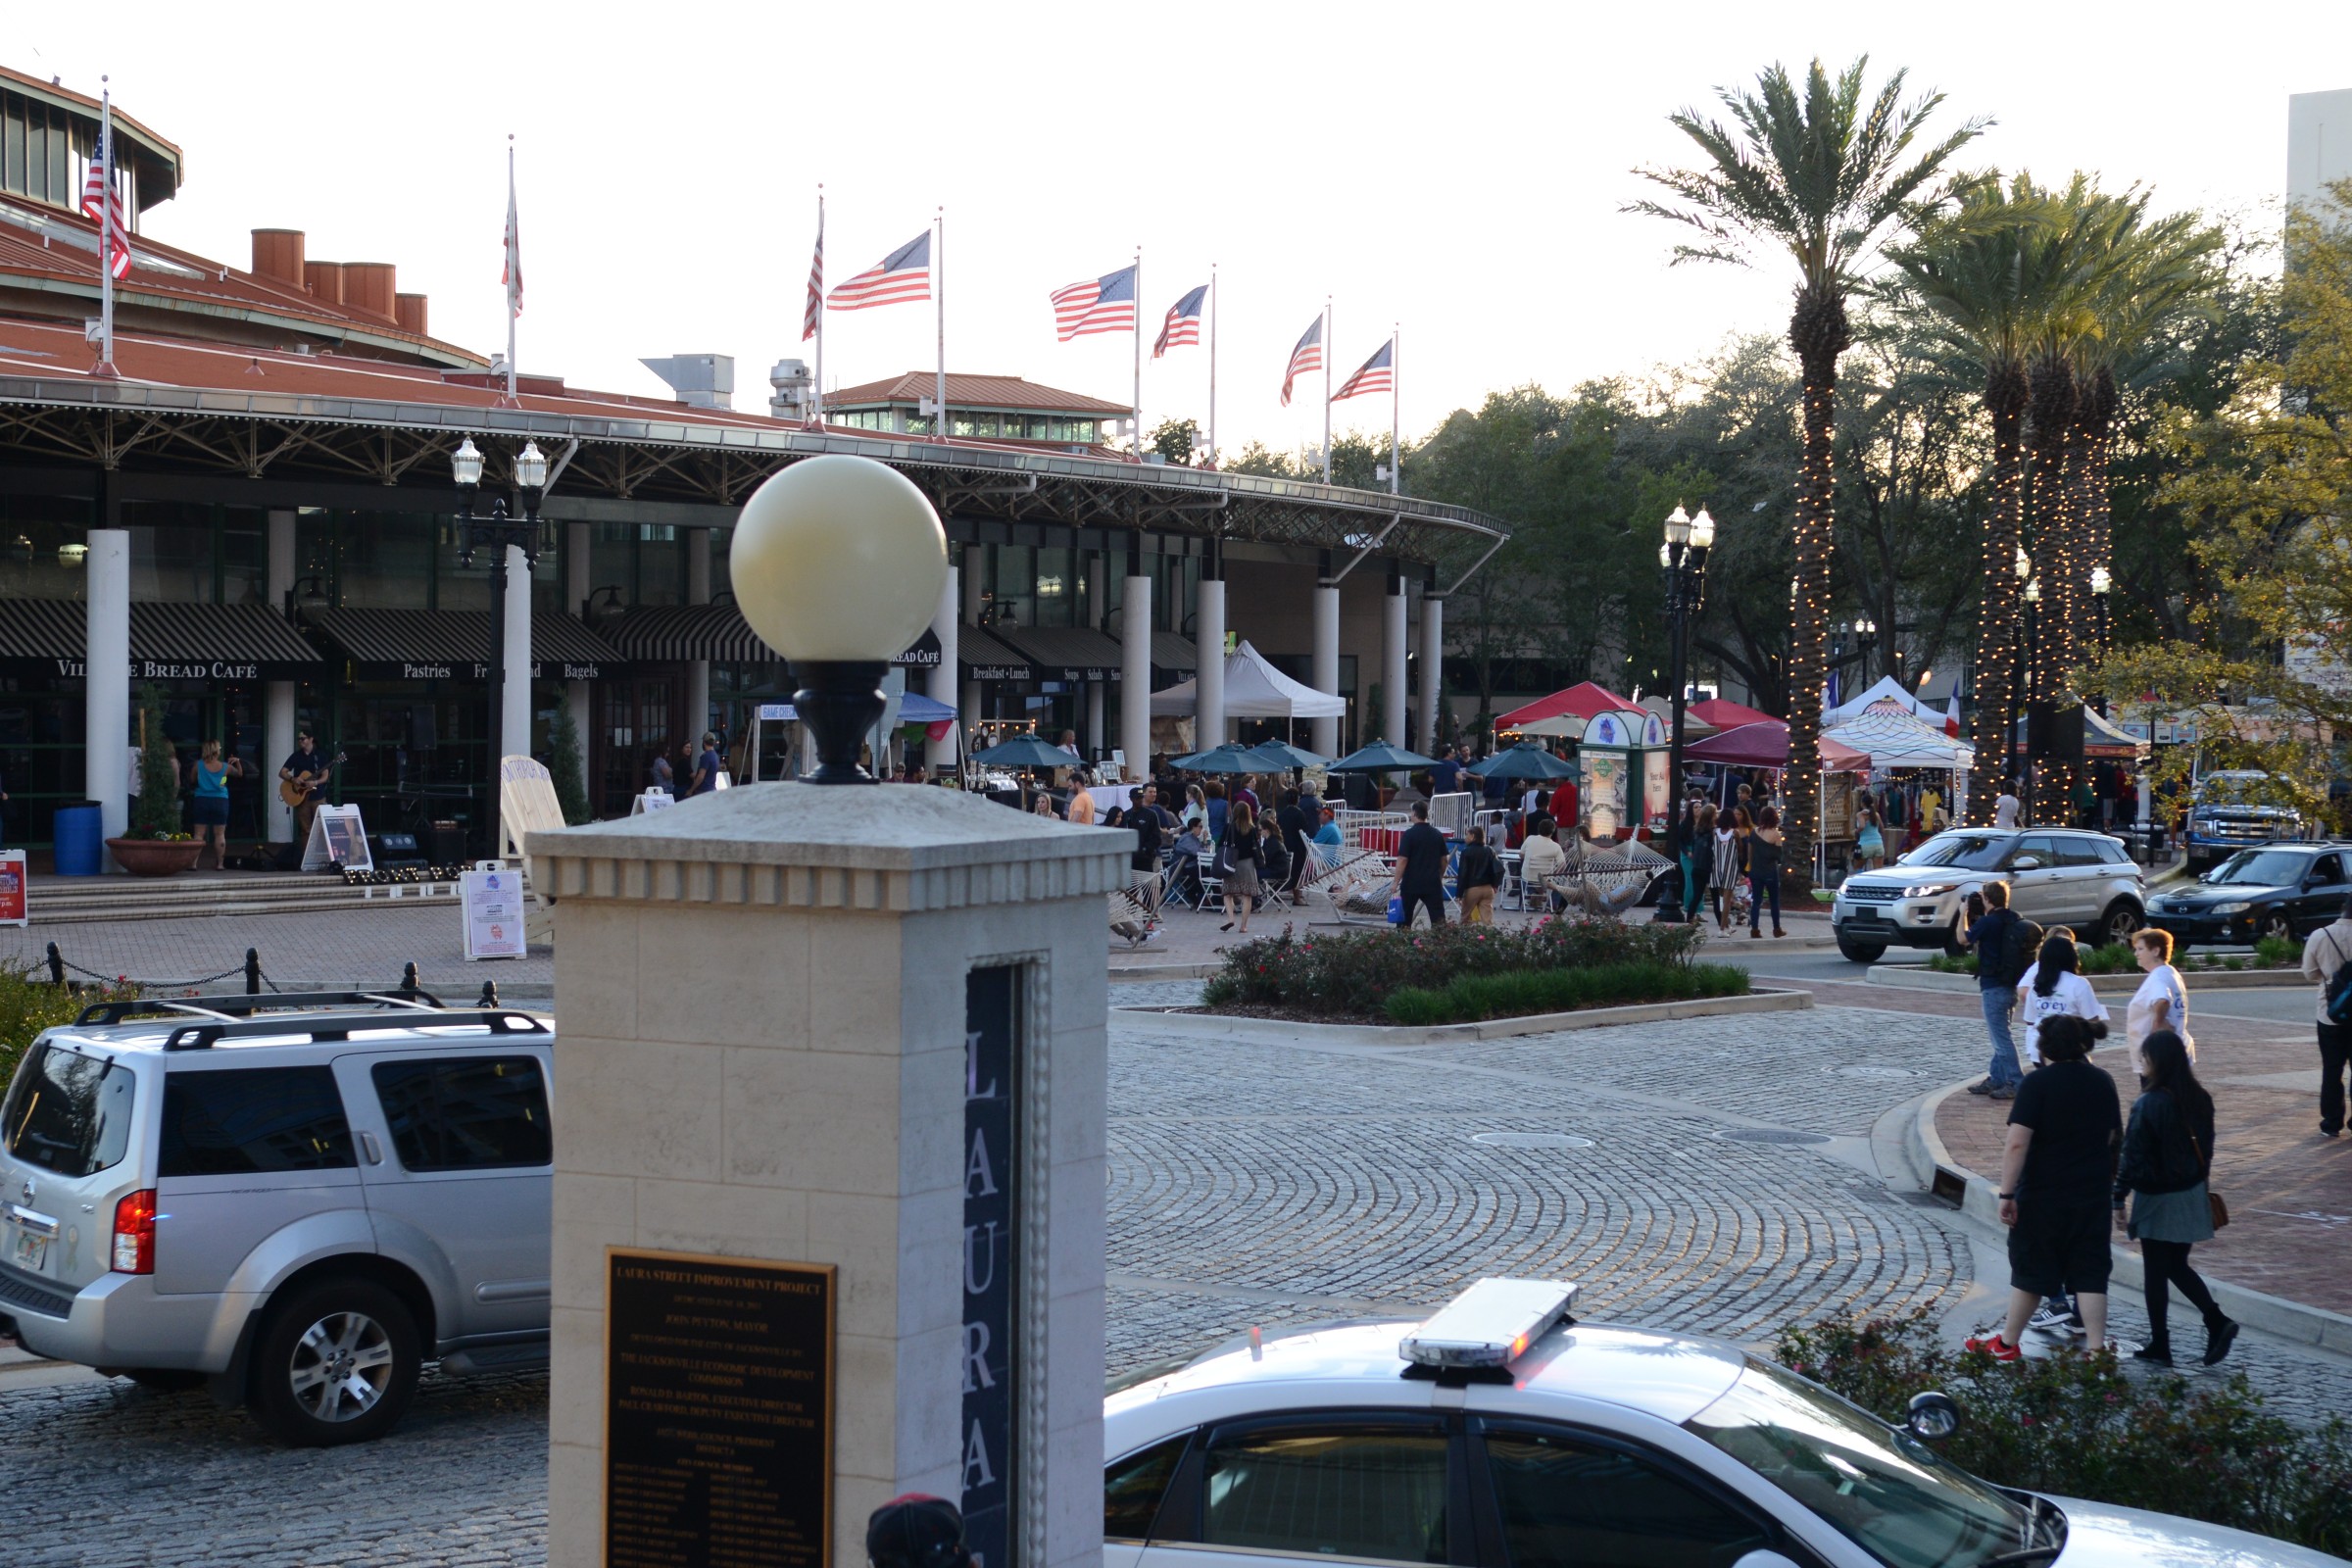 A view from the corner of Laura and Bay Streets provides a snapshot of the vendors lined up at the front entrance to the Jacksonville Landing, the area coined as the “Front Porch” at Art Walk.